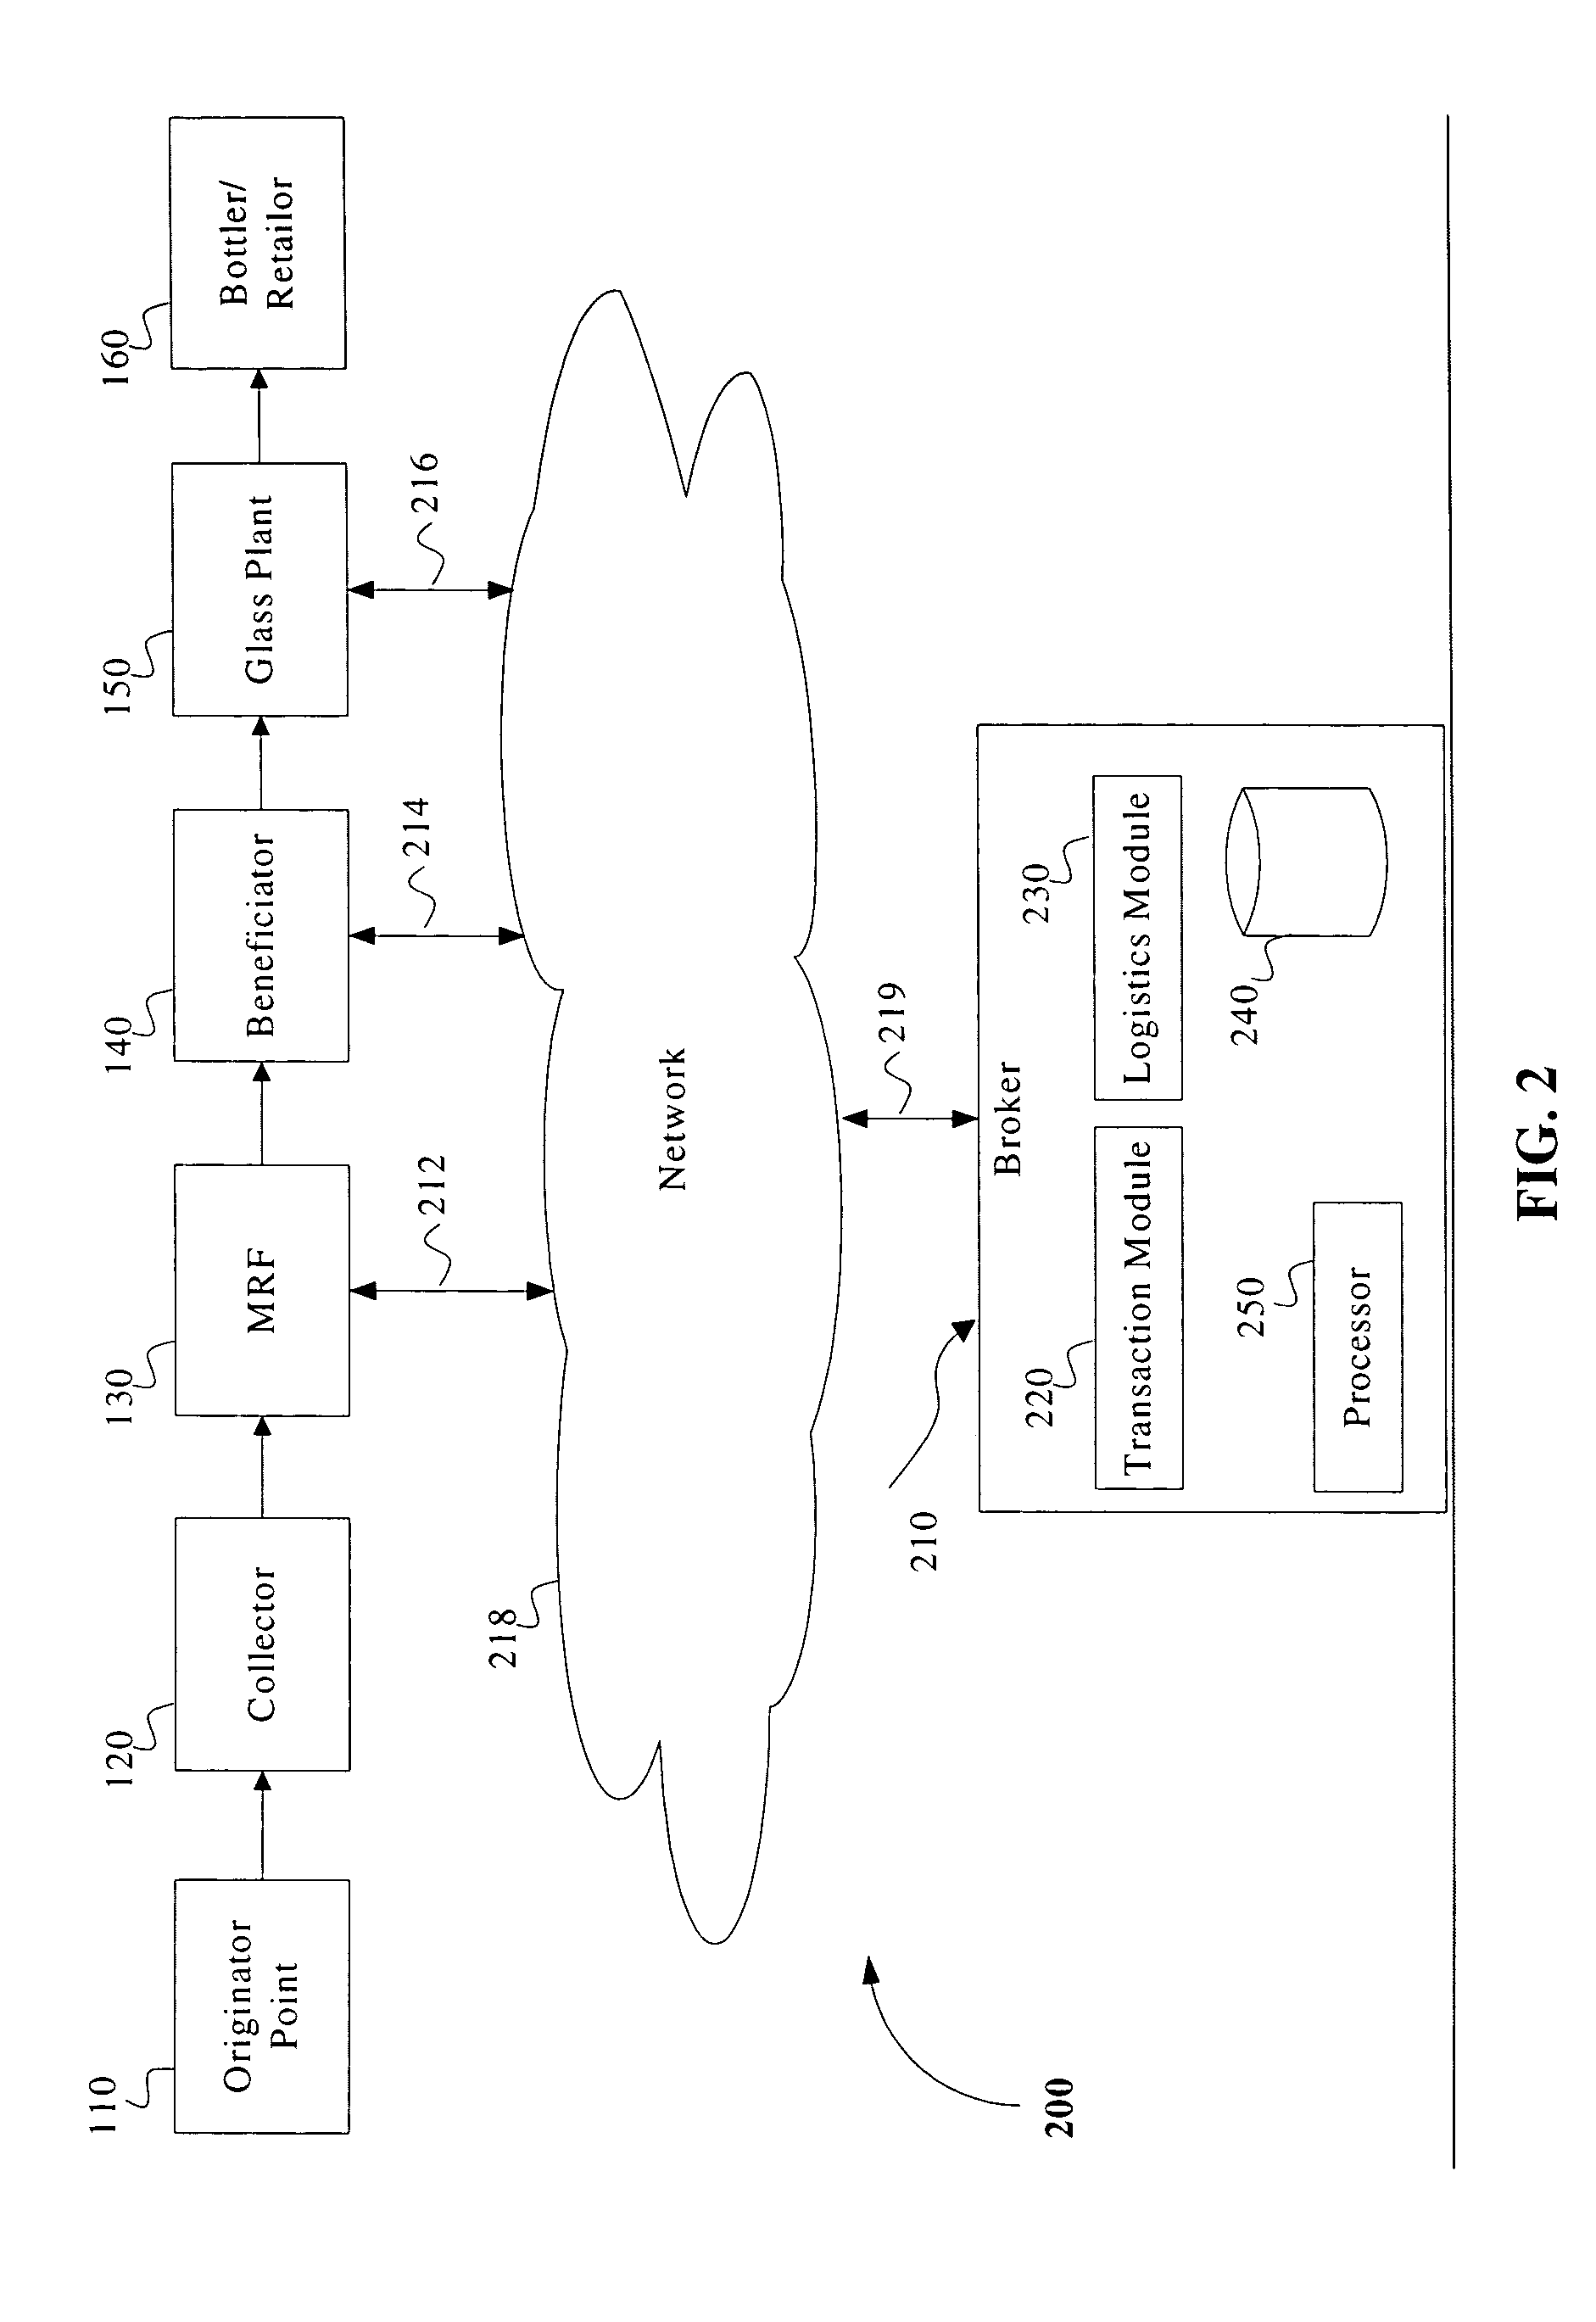 Method, system and computer readable medium for brokering the purchase and sale of glass cullet